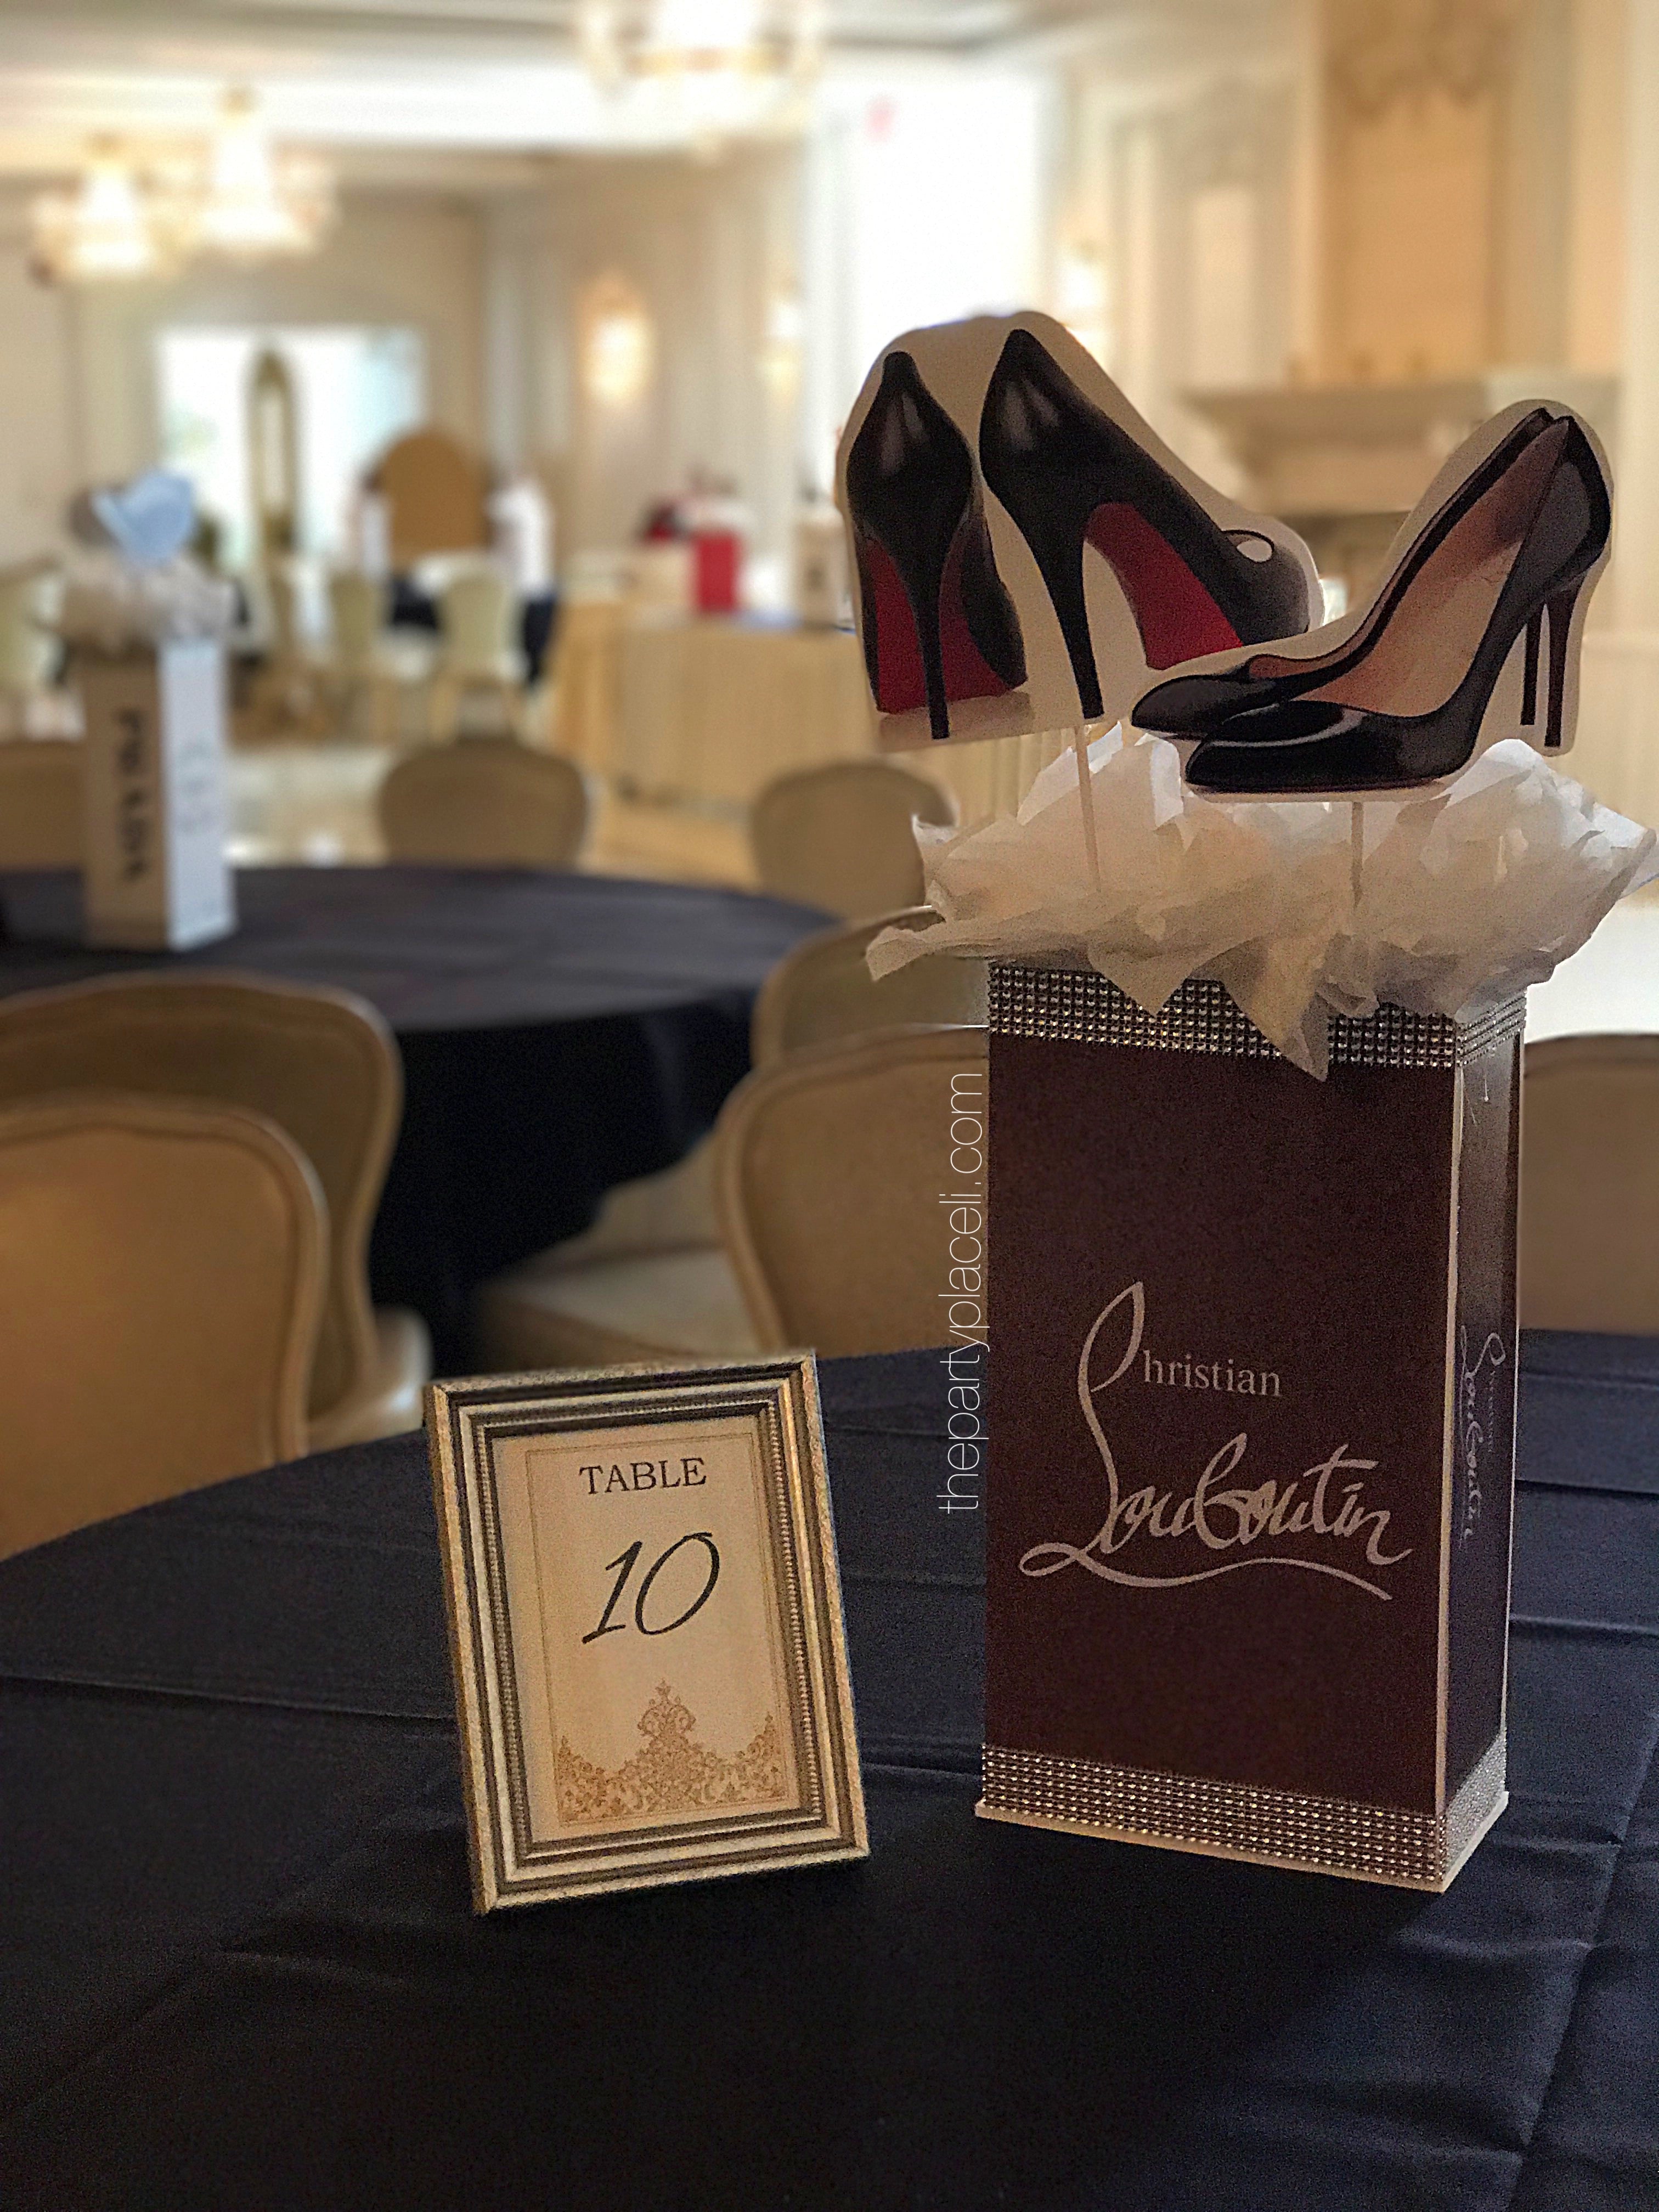 Shopping and Fashion Themed Centerpieces for Sweet 16, 21st, 30th, 40t –  SoCal Event Decor